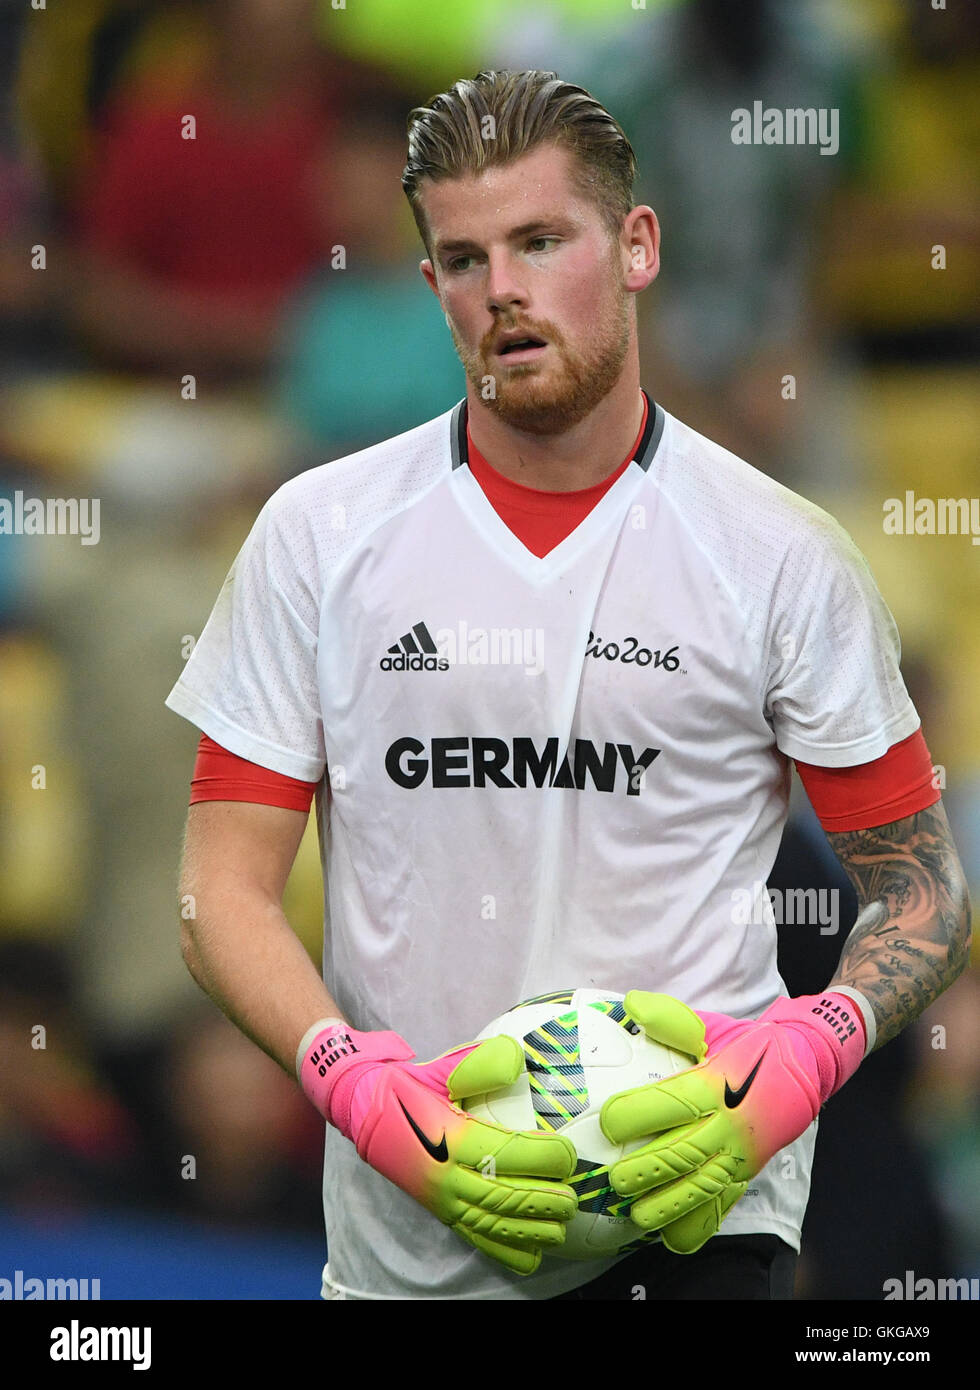 Rio de Janeiro, Brazil. 20th Aug, 2016. Goalkeeper Timo Horn of Germany warms-up prior to the Men's soccer Gold Medal Match between Brazil and Germany during the Rio 2016 Olympic Games at the Maracana in Rio de Janeiro, Brazil, 20 August 2016. Photo: Soeren Stache/dpa/Alamy Live News Stock Photo